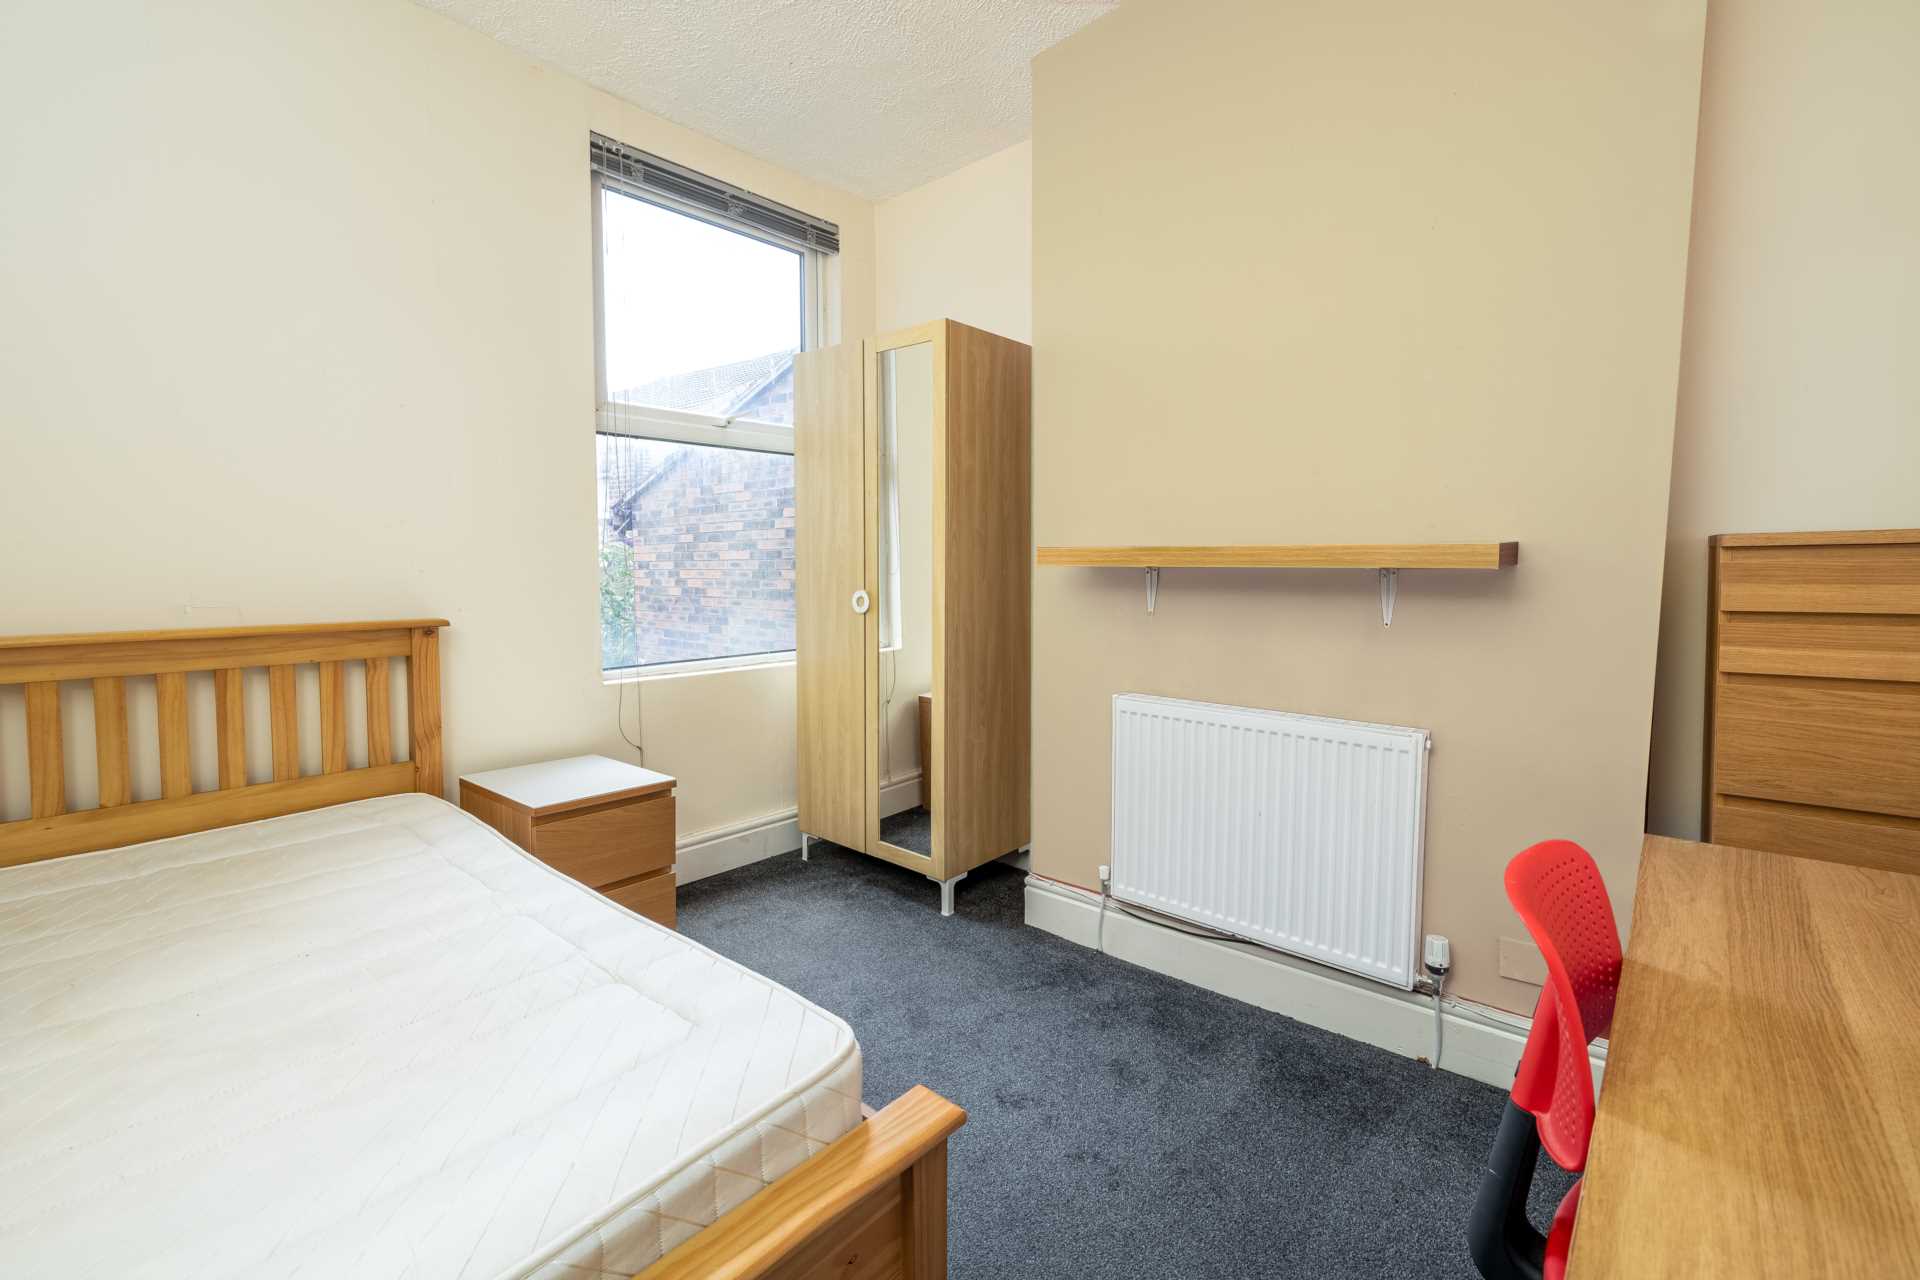 Garmoyle Road, Wavertree - NO DEPOSIT - BILLS INCLUDED - FIRST 2 MONTHS FREE, Image 6